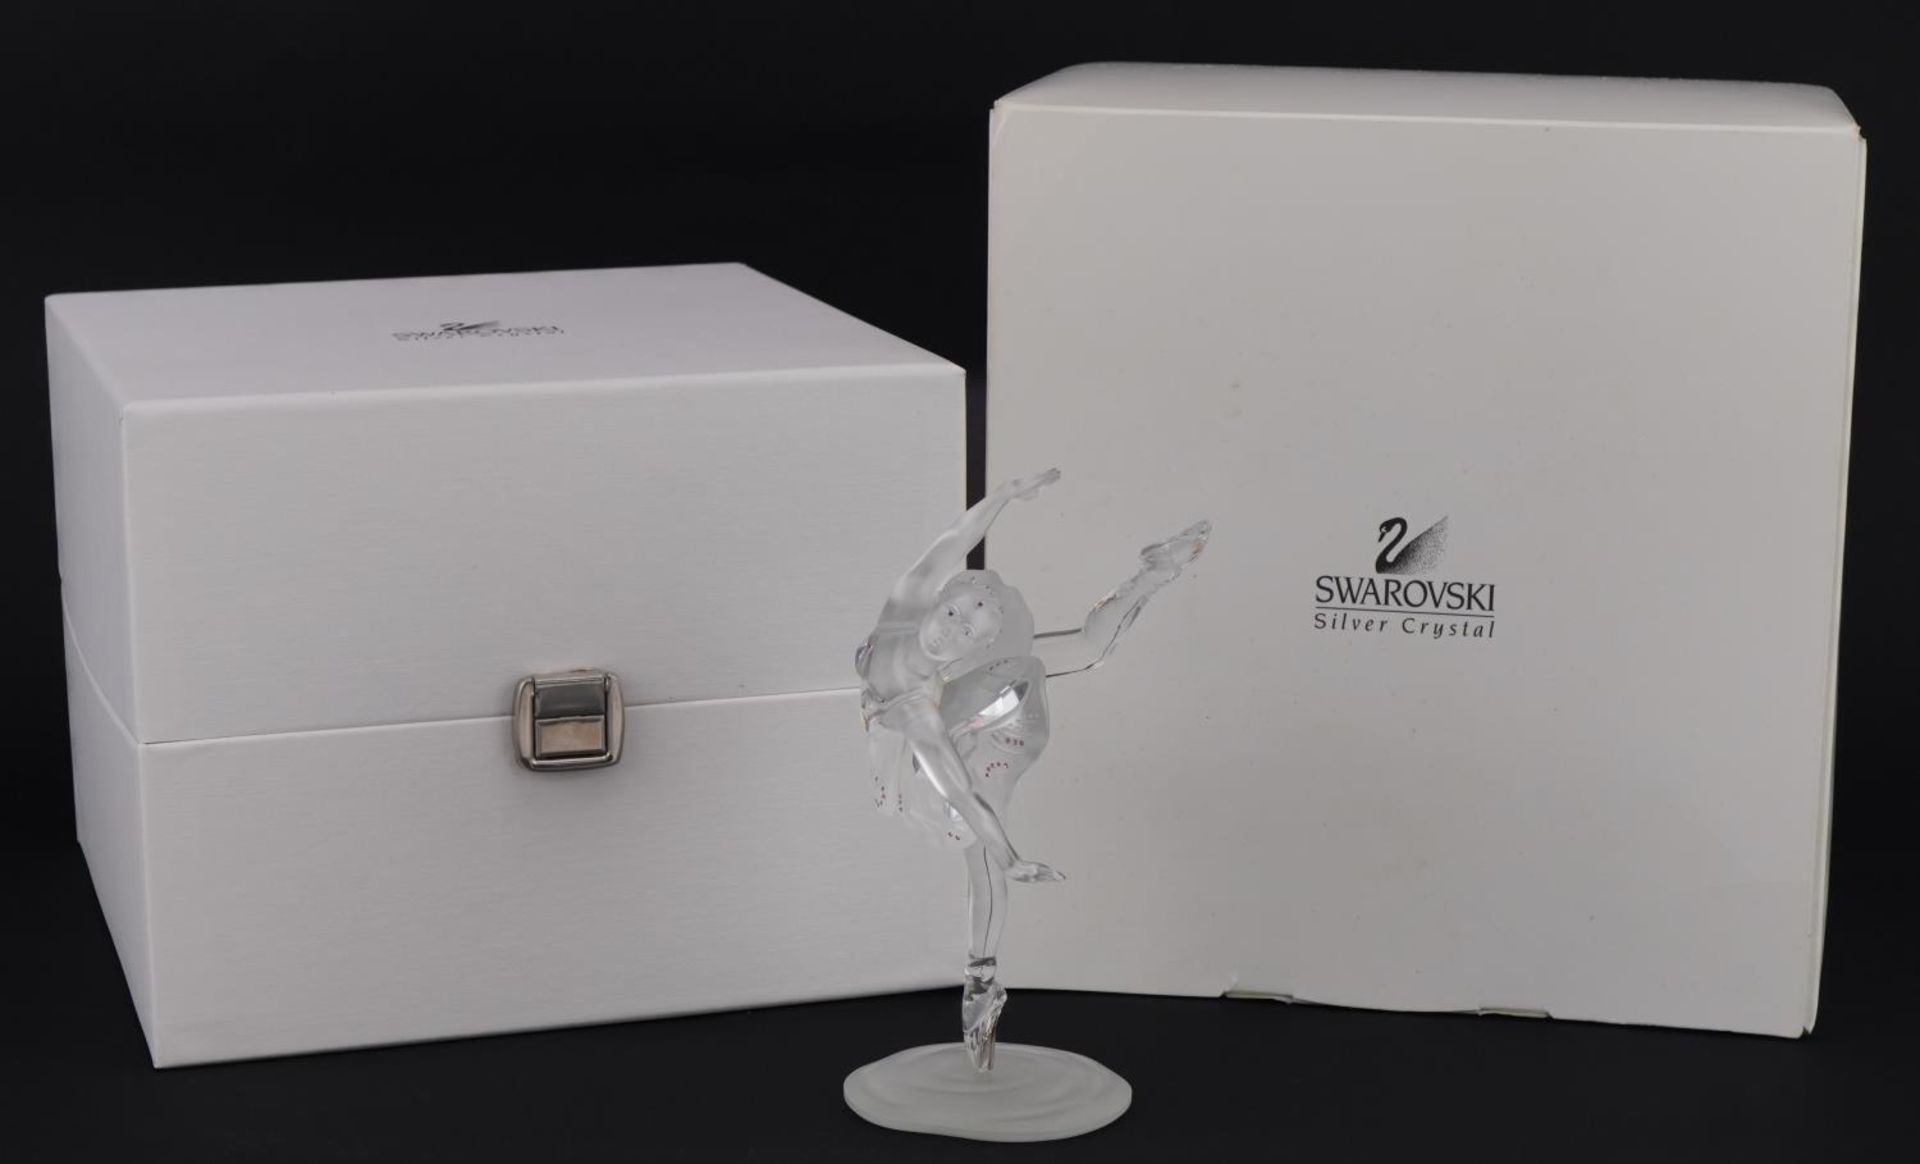 Swarovski Crystal jewelled ballerina with fitted box, 14cm high : For further information on this